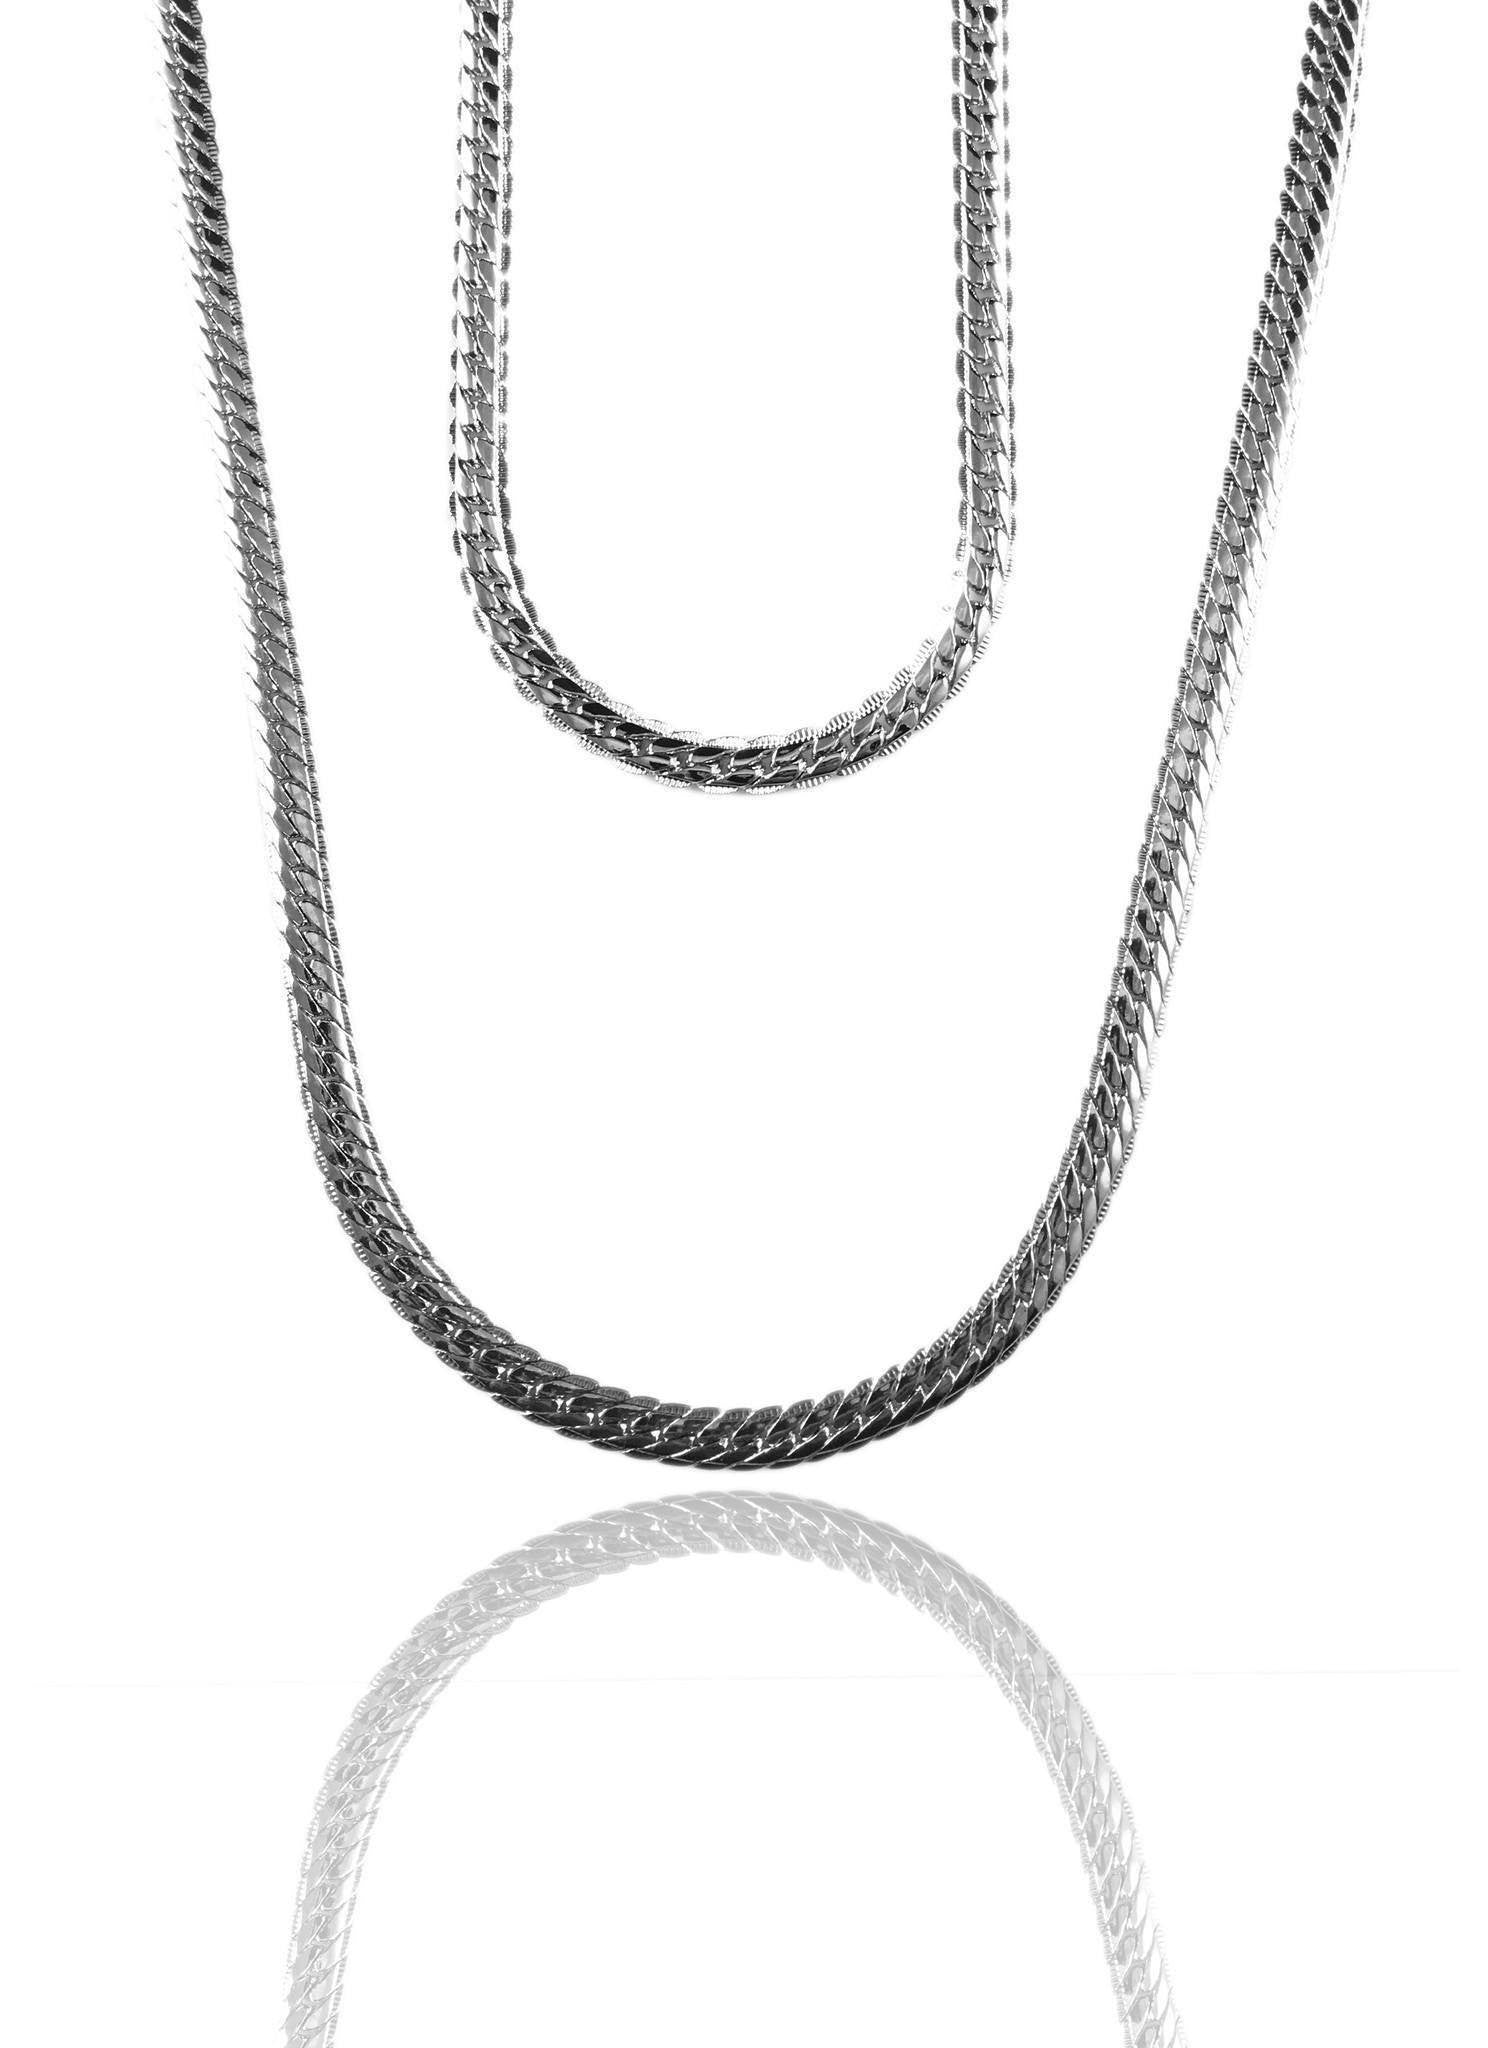 Necklace - Cadena Chains Layered Set X Stainless